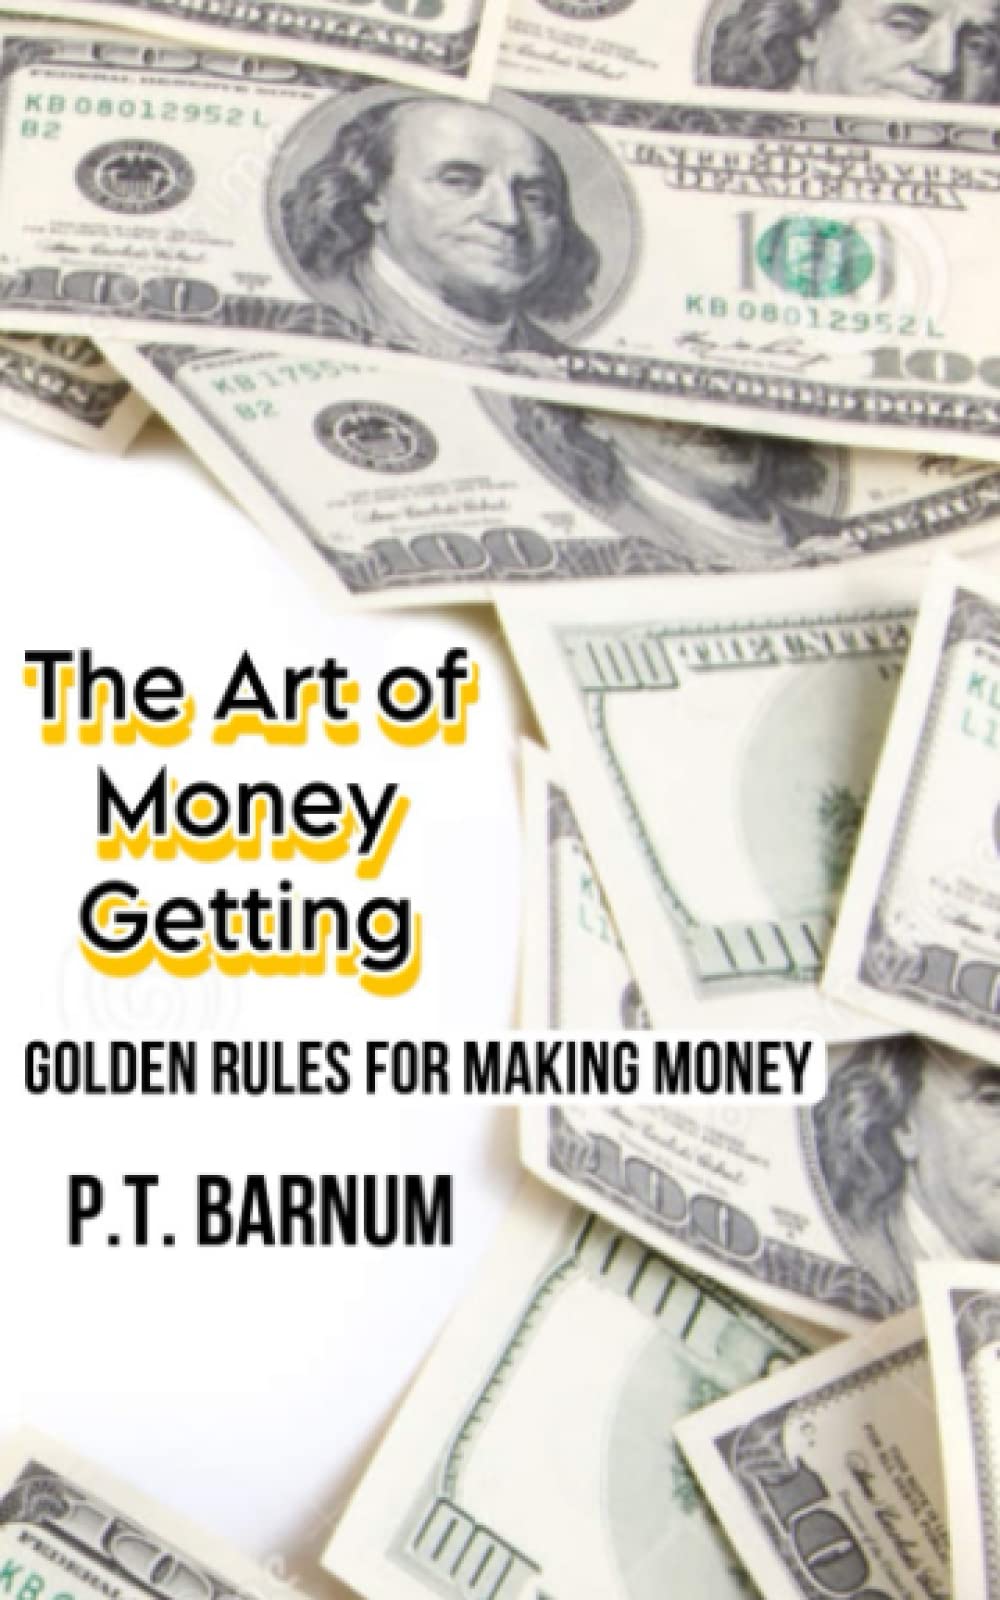 THE ART OF MONEY GETTING: GOLDEN RULES FOR MAKING MONEY